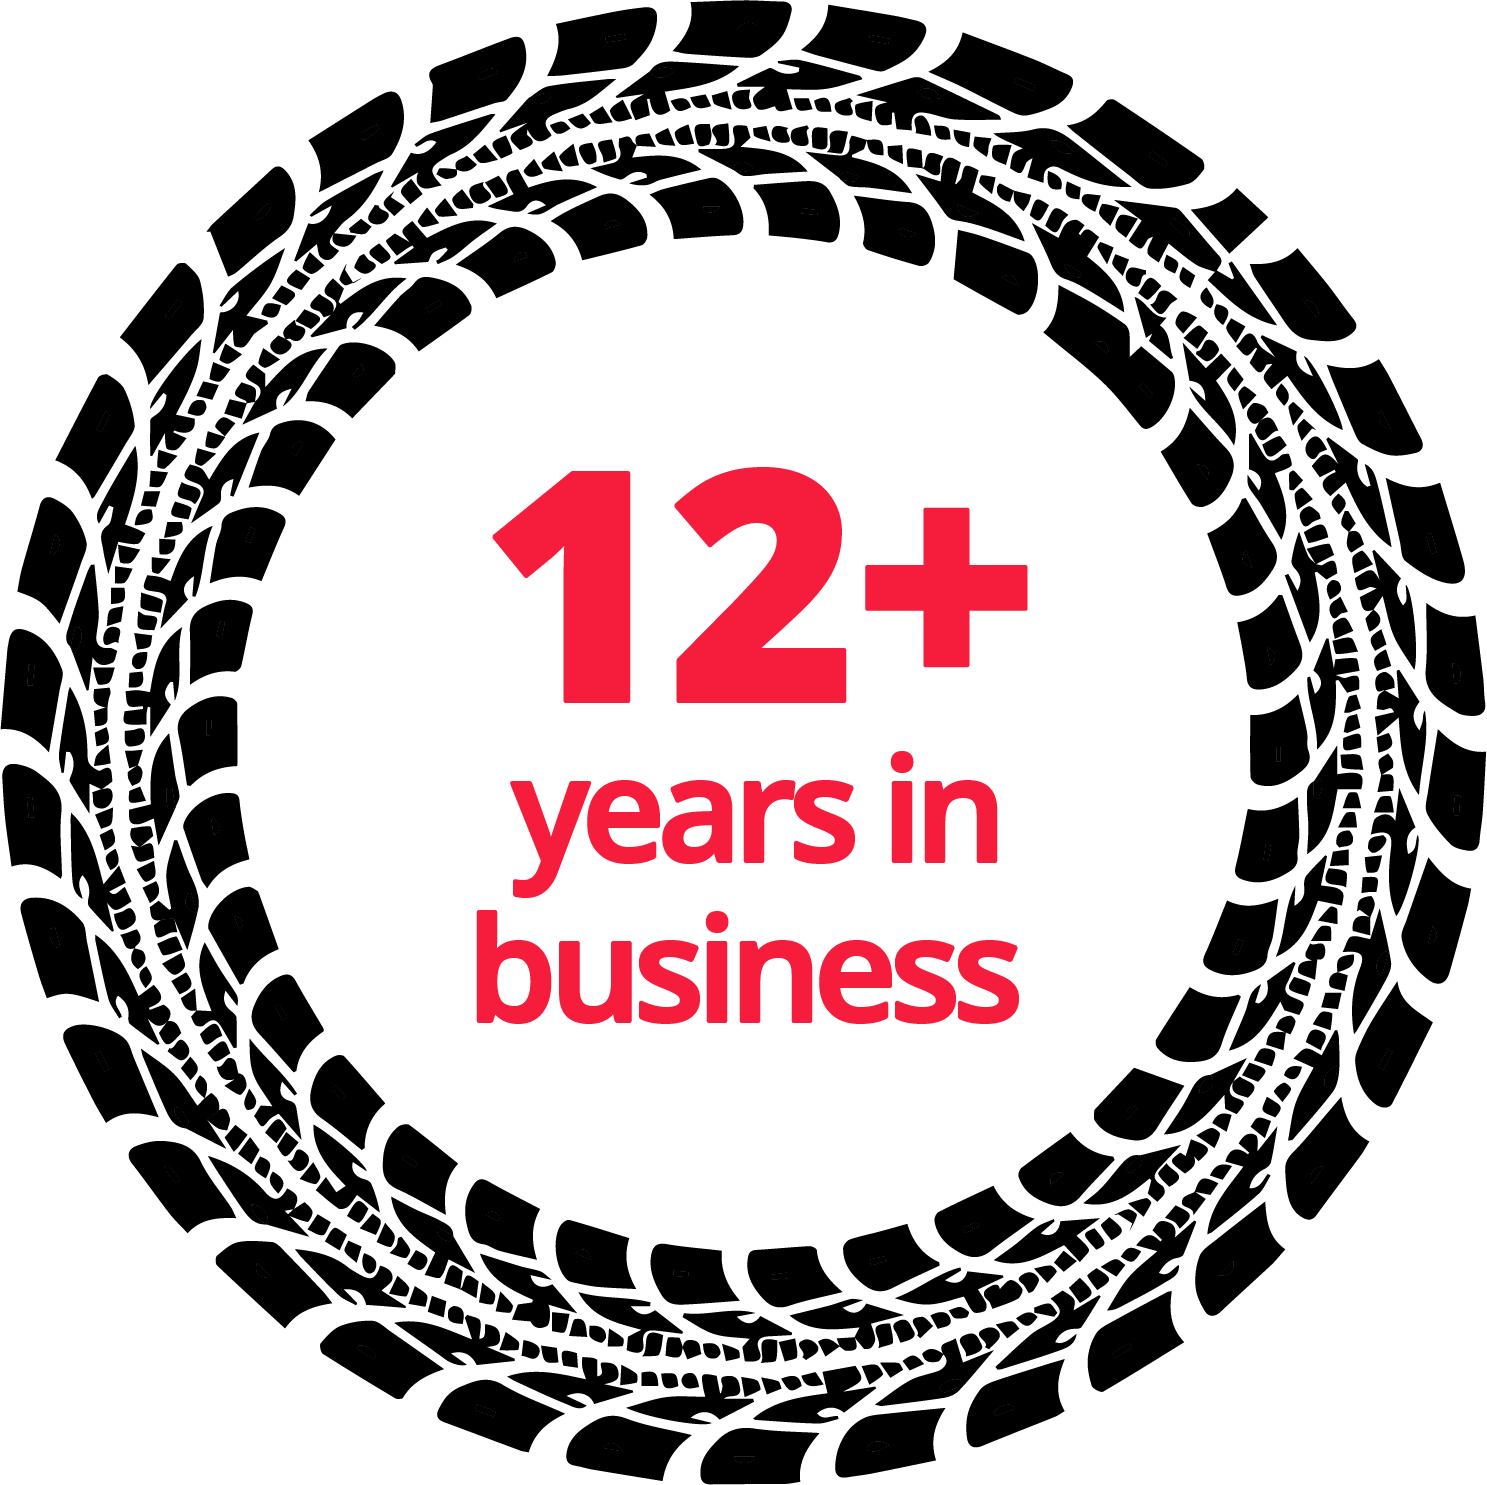 12+ Years in Business